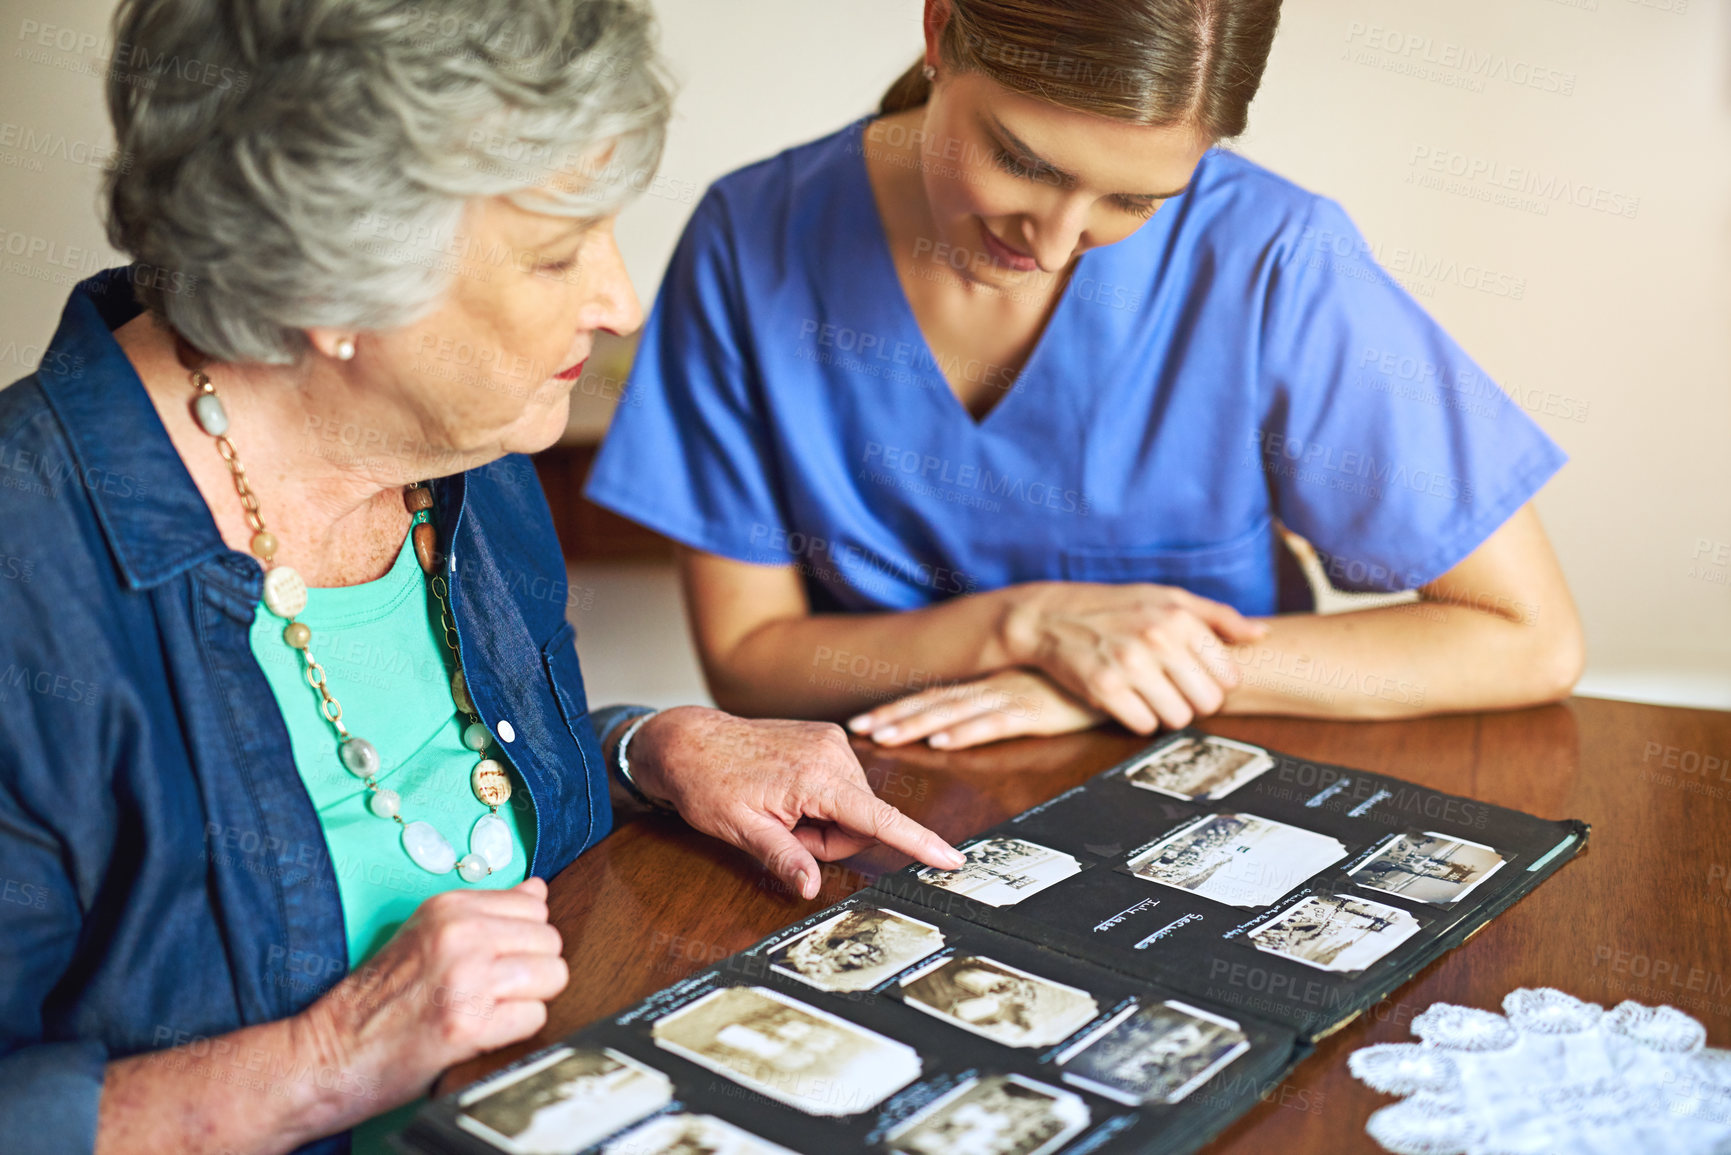 Buy stock photo Shot of a resident and a nurse looking through a photo album